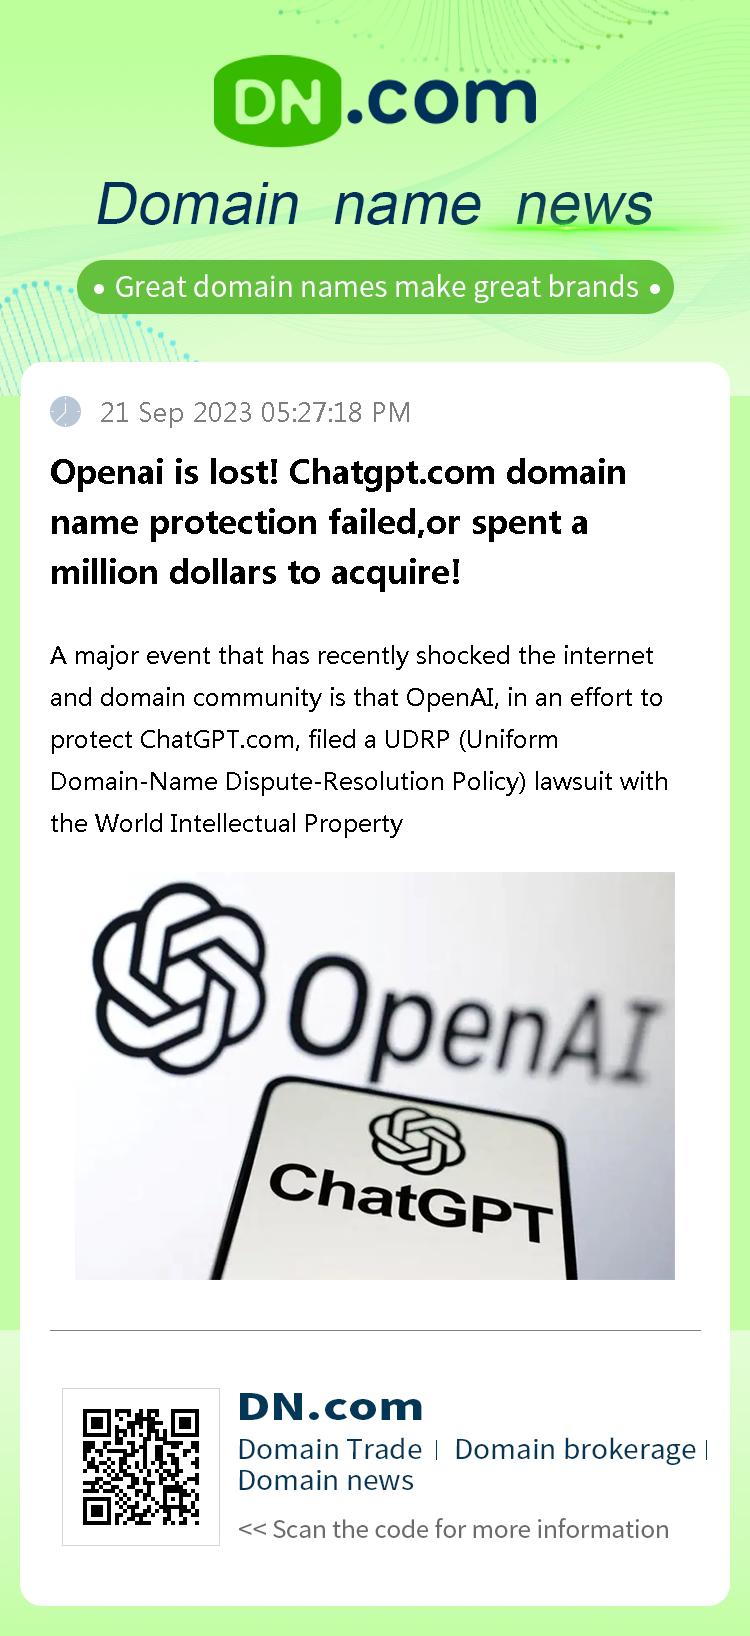 Openai is lost! Chatgpt.com domain name protection failed,or spent a million dollars to acquire!